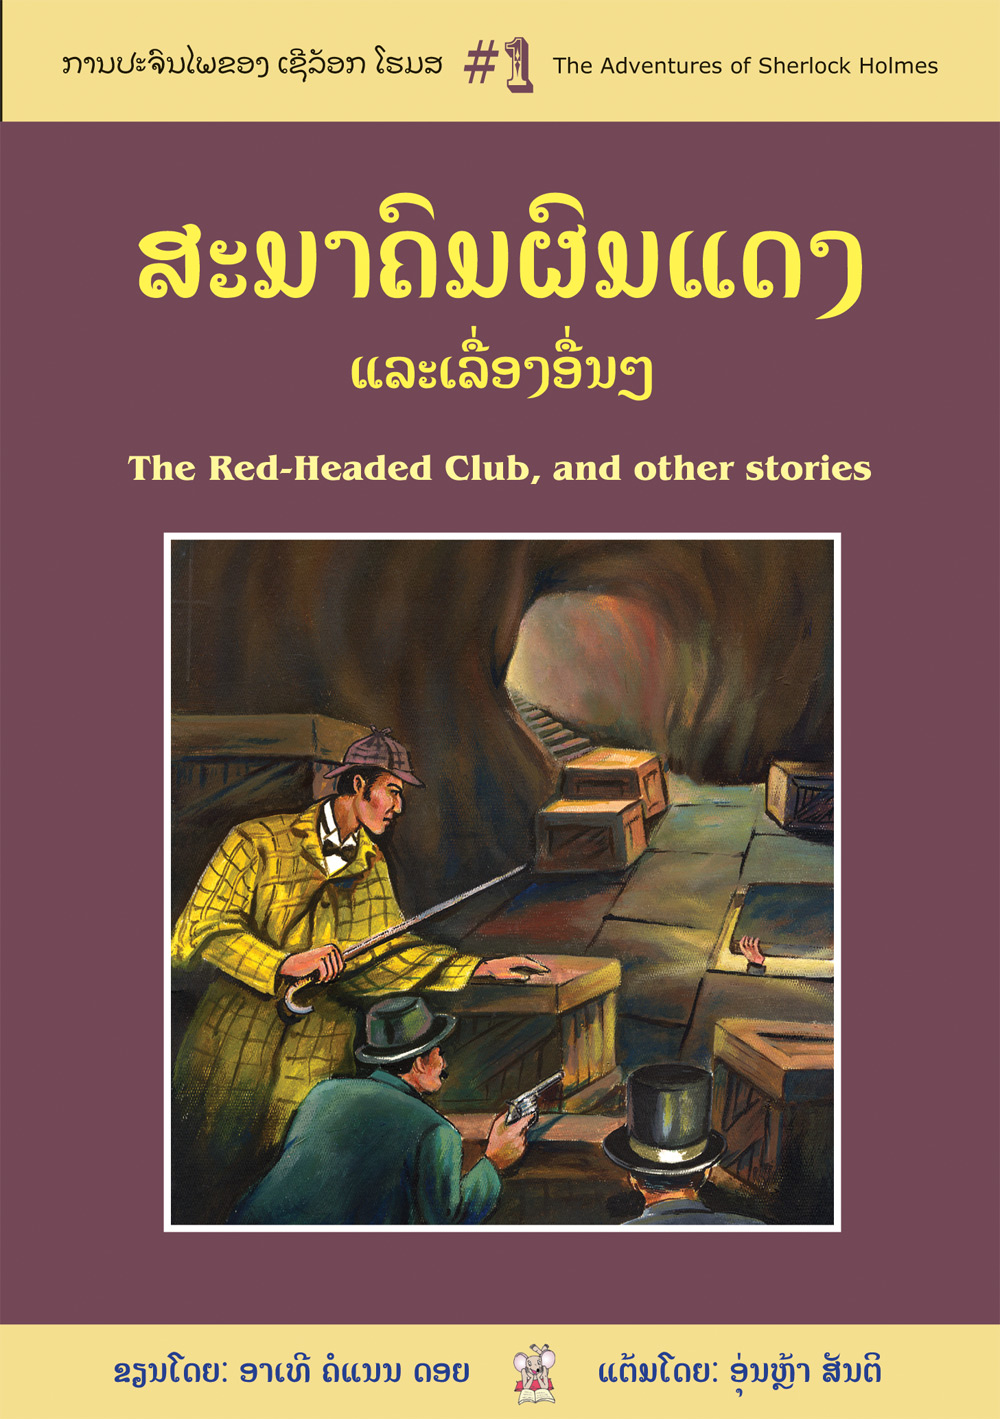 The Red-Headed Club, and other stories large book cover, published in Lao and English